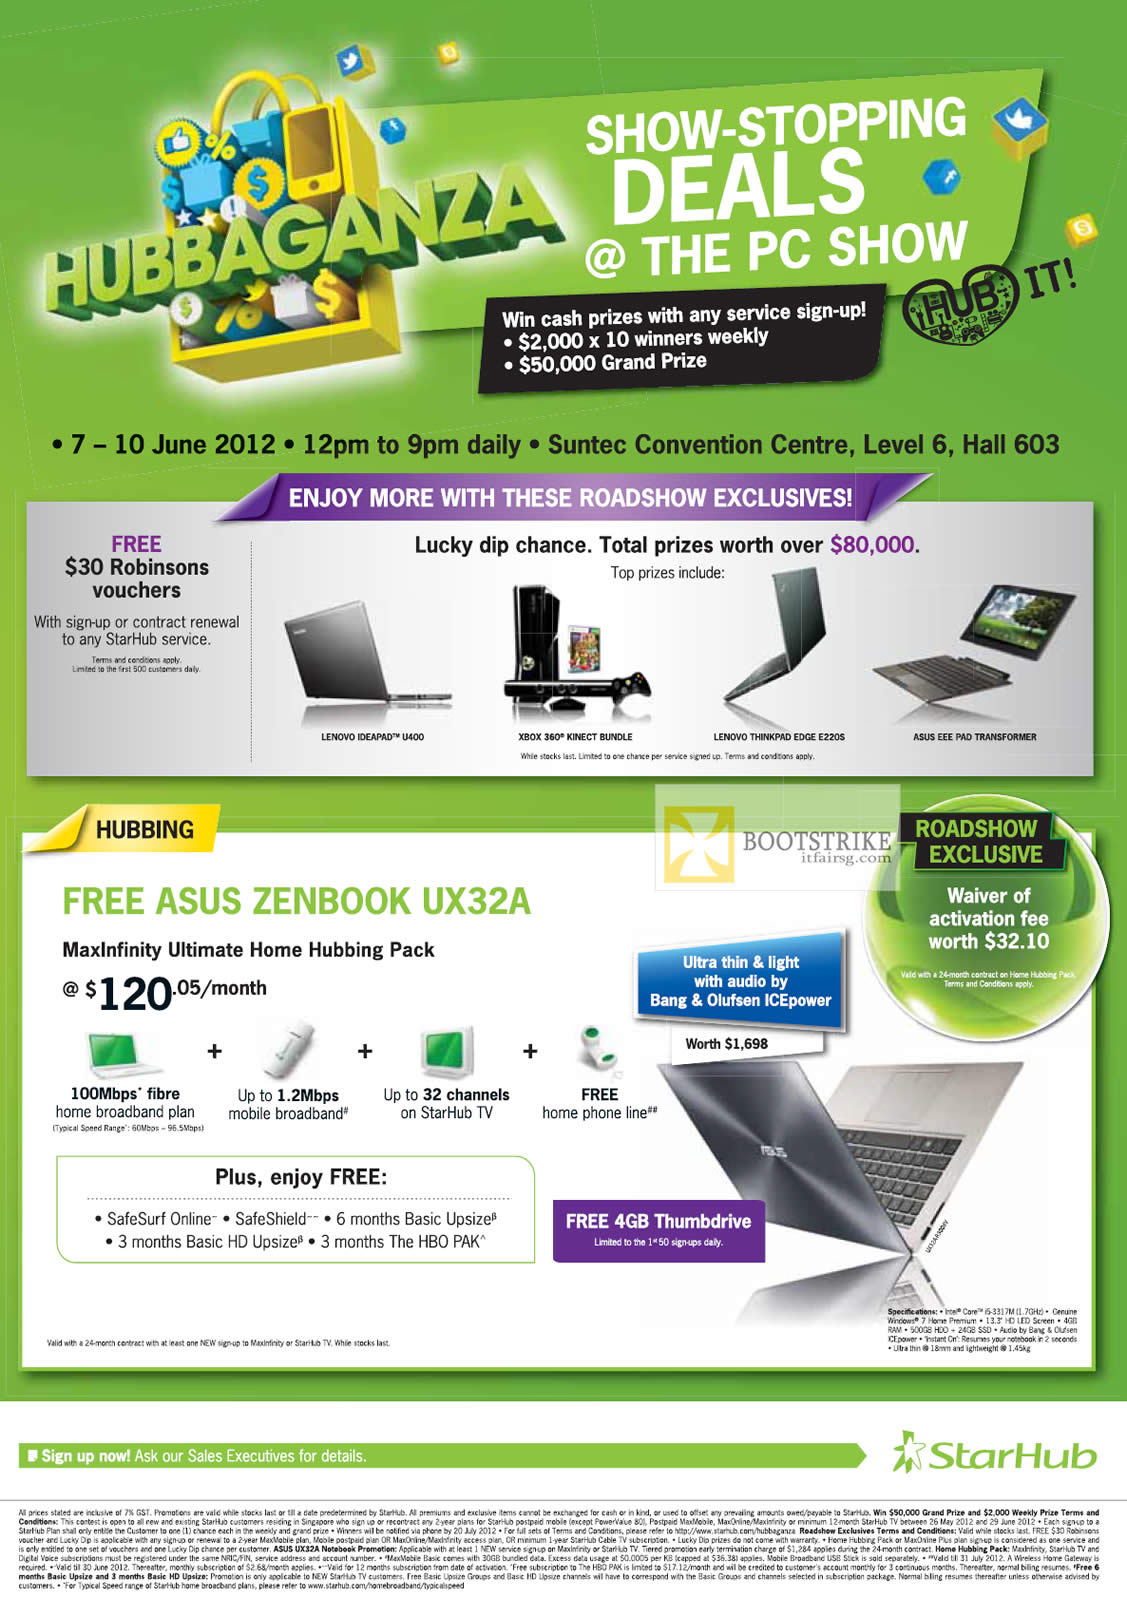 PC SHOW 2012 price list image brochure of Starhub Lucky Dip, Robinsons Vouchers, Hubbing Free ASUS Zenbook UX32A